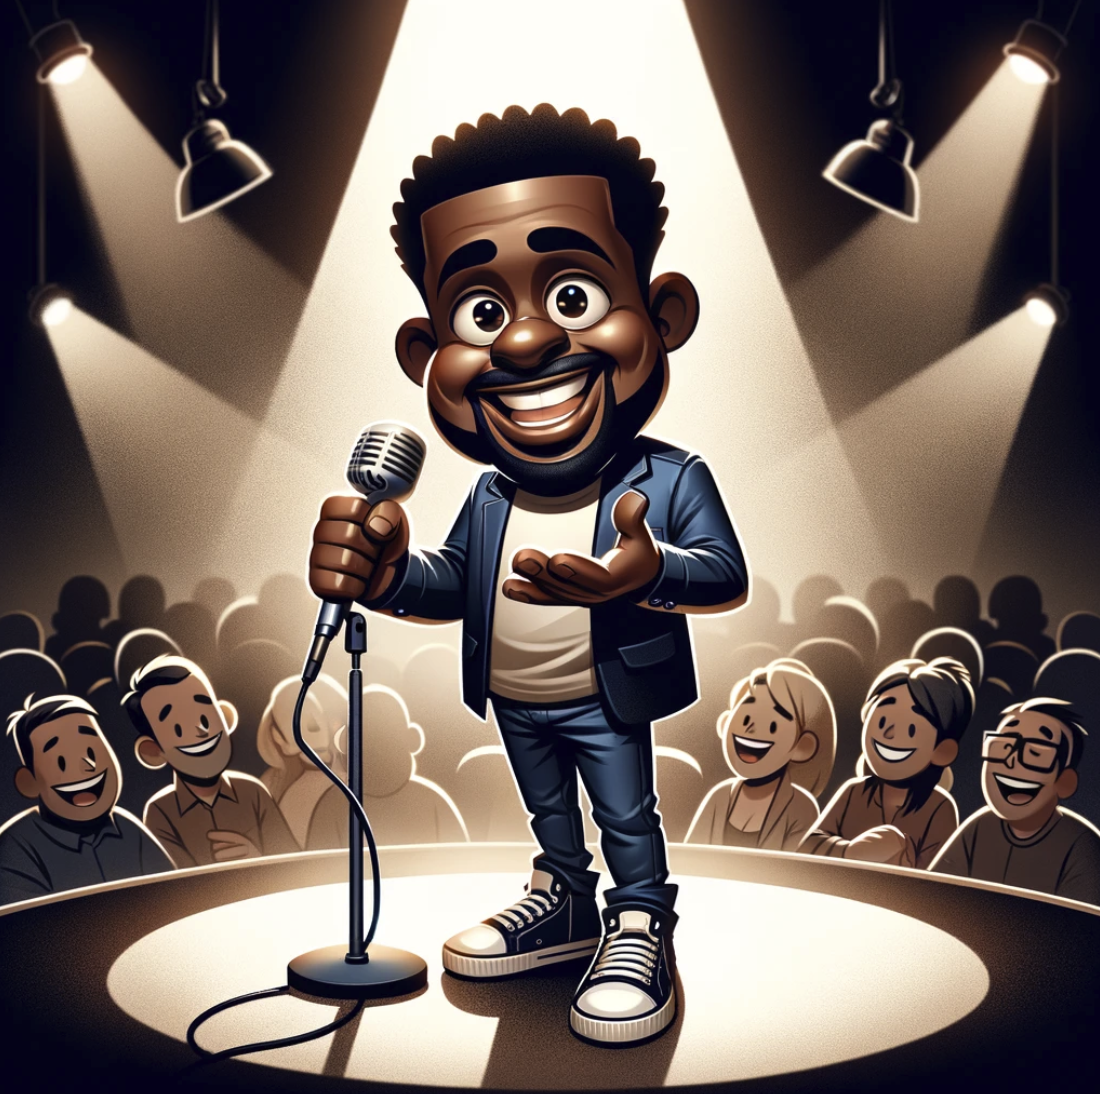 image of a black comedian on stage, capturing the essence of an engaging and humorous stand-up comedy performance